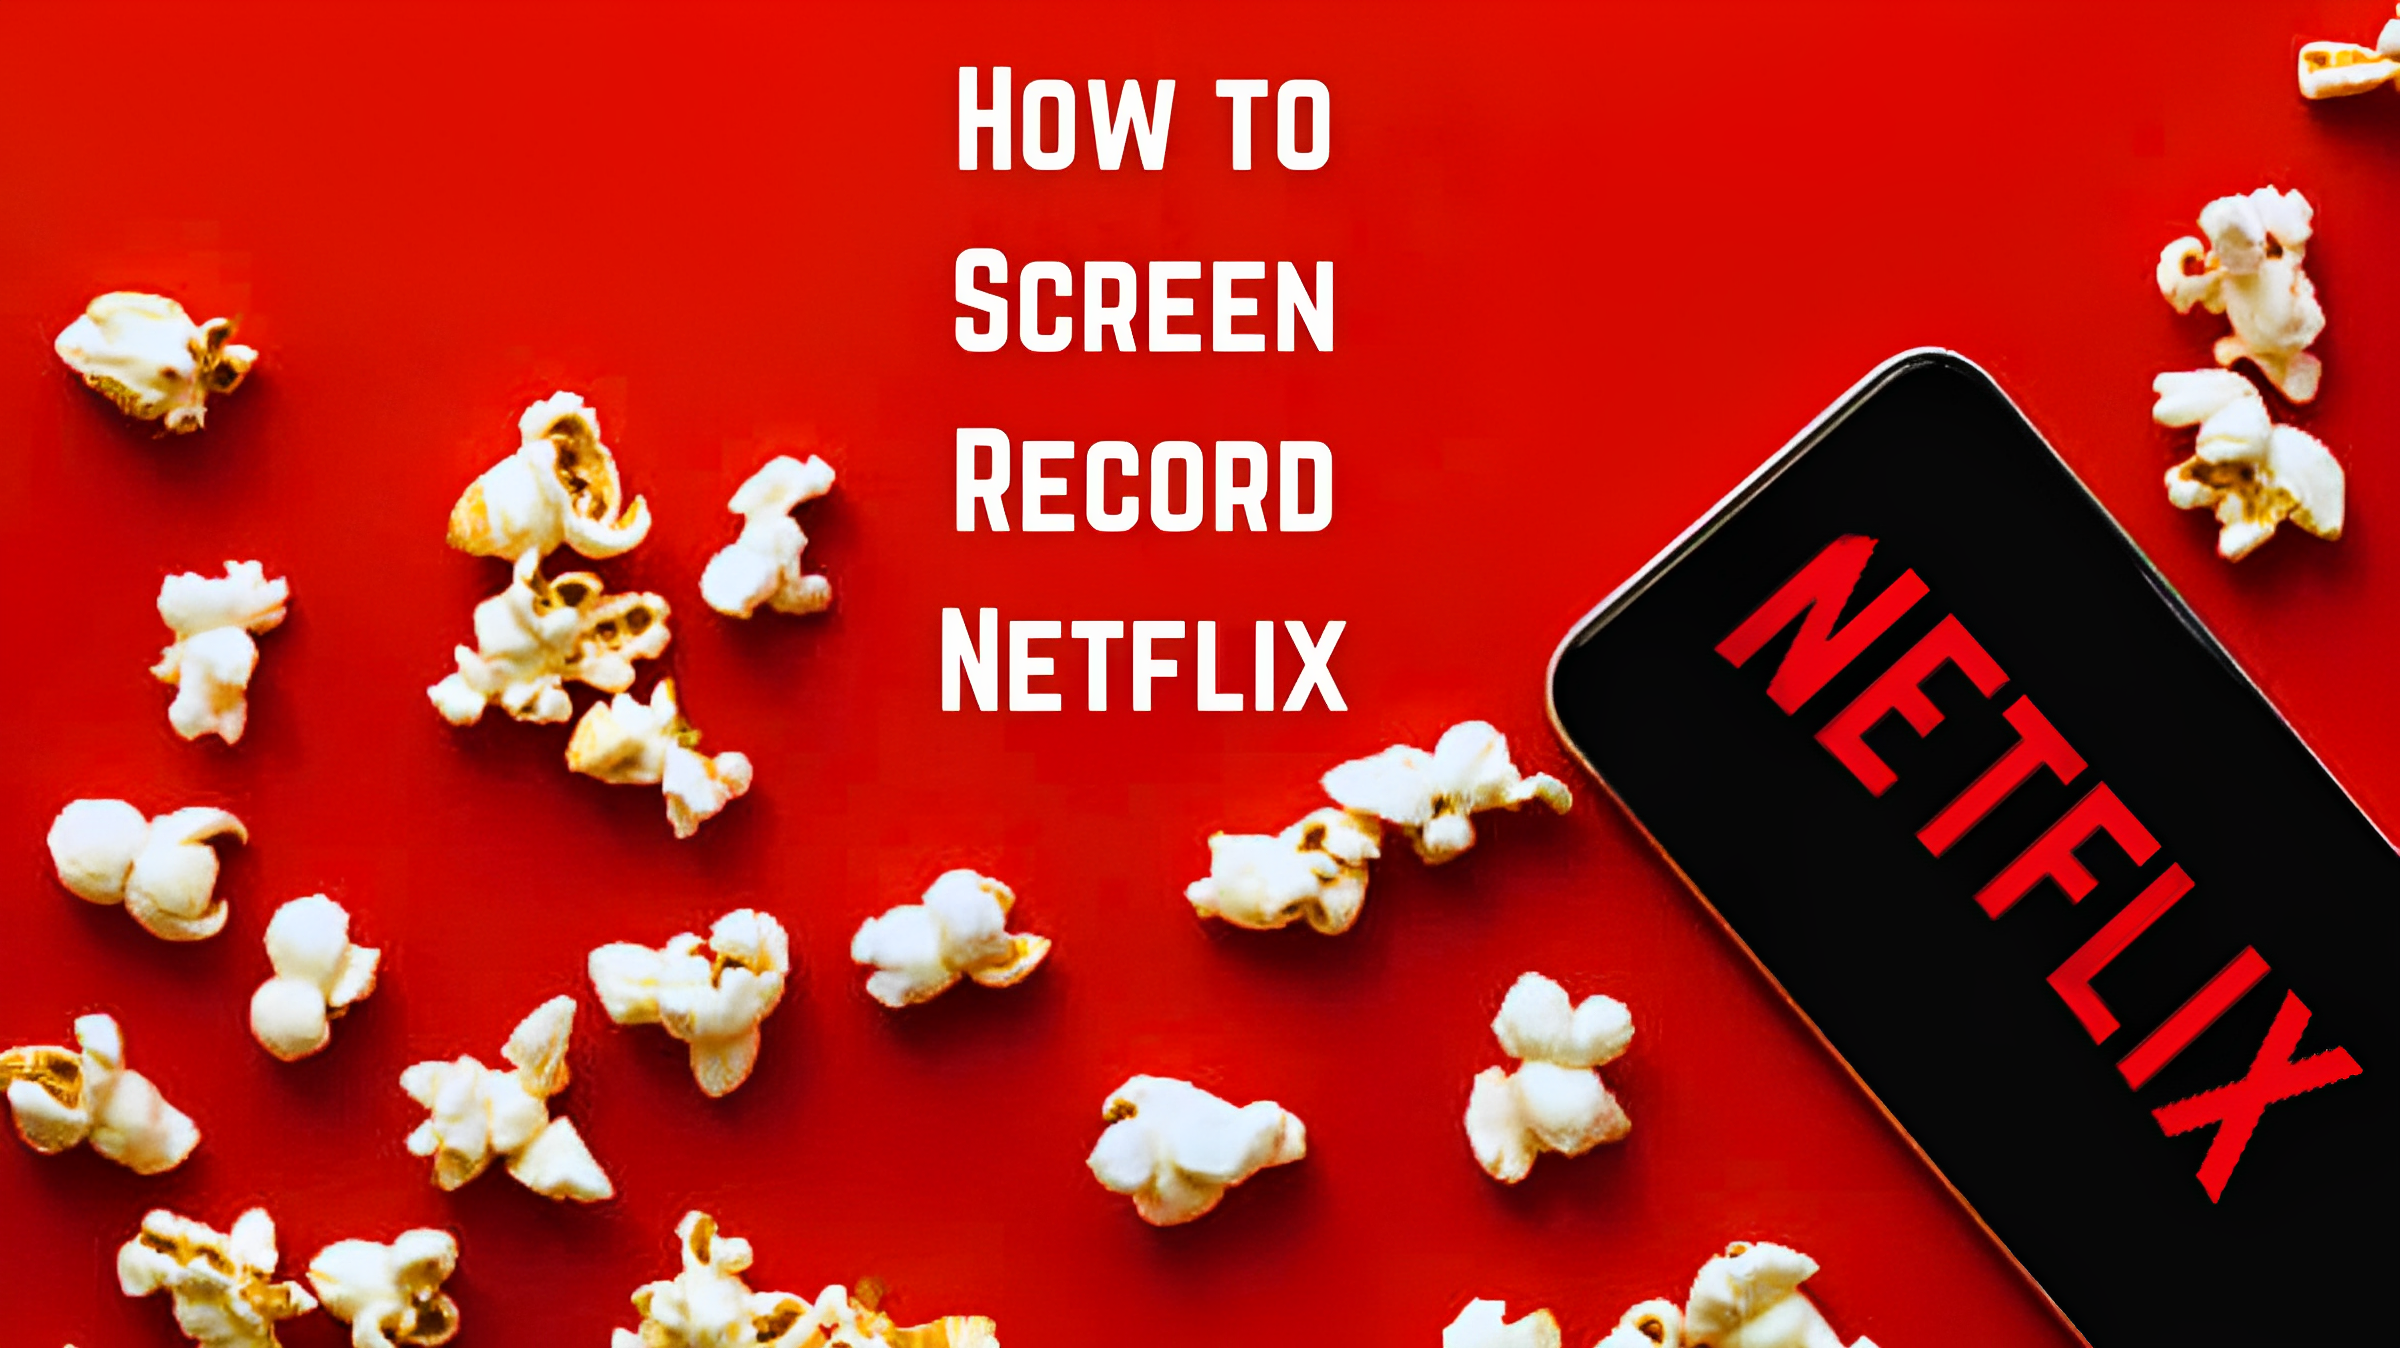 How to Screen Record Netflix on Android, iPhone, and Windows (Easy Methods)